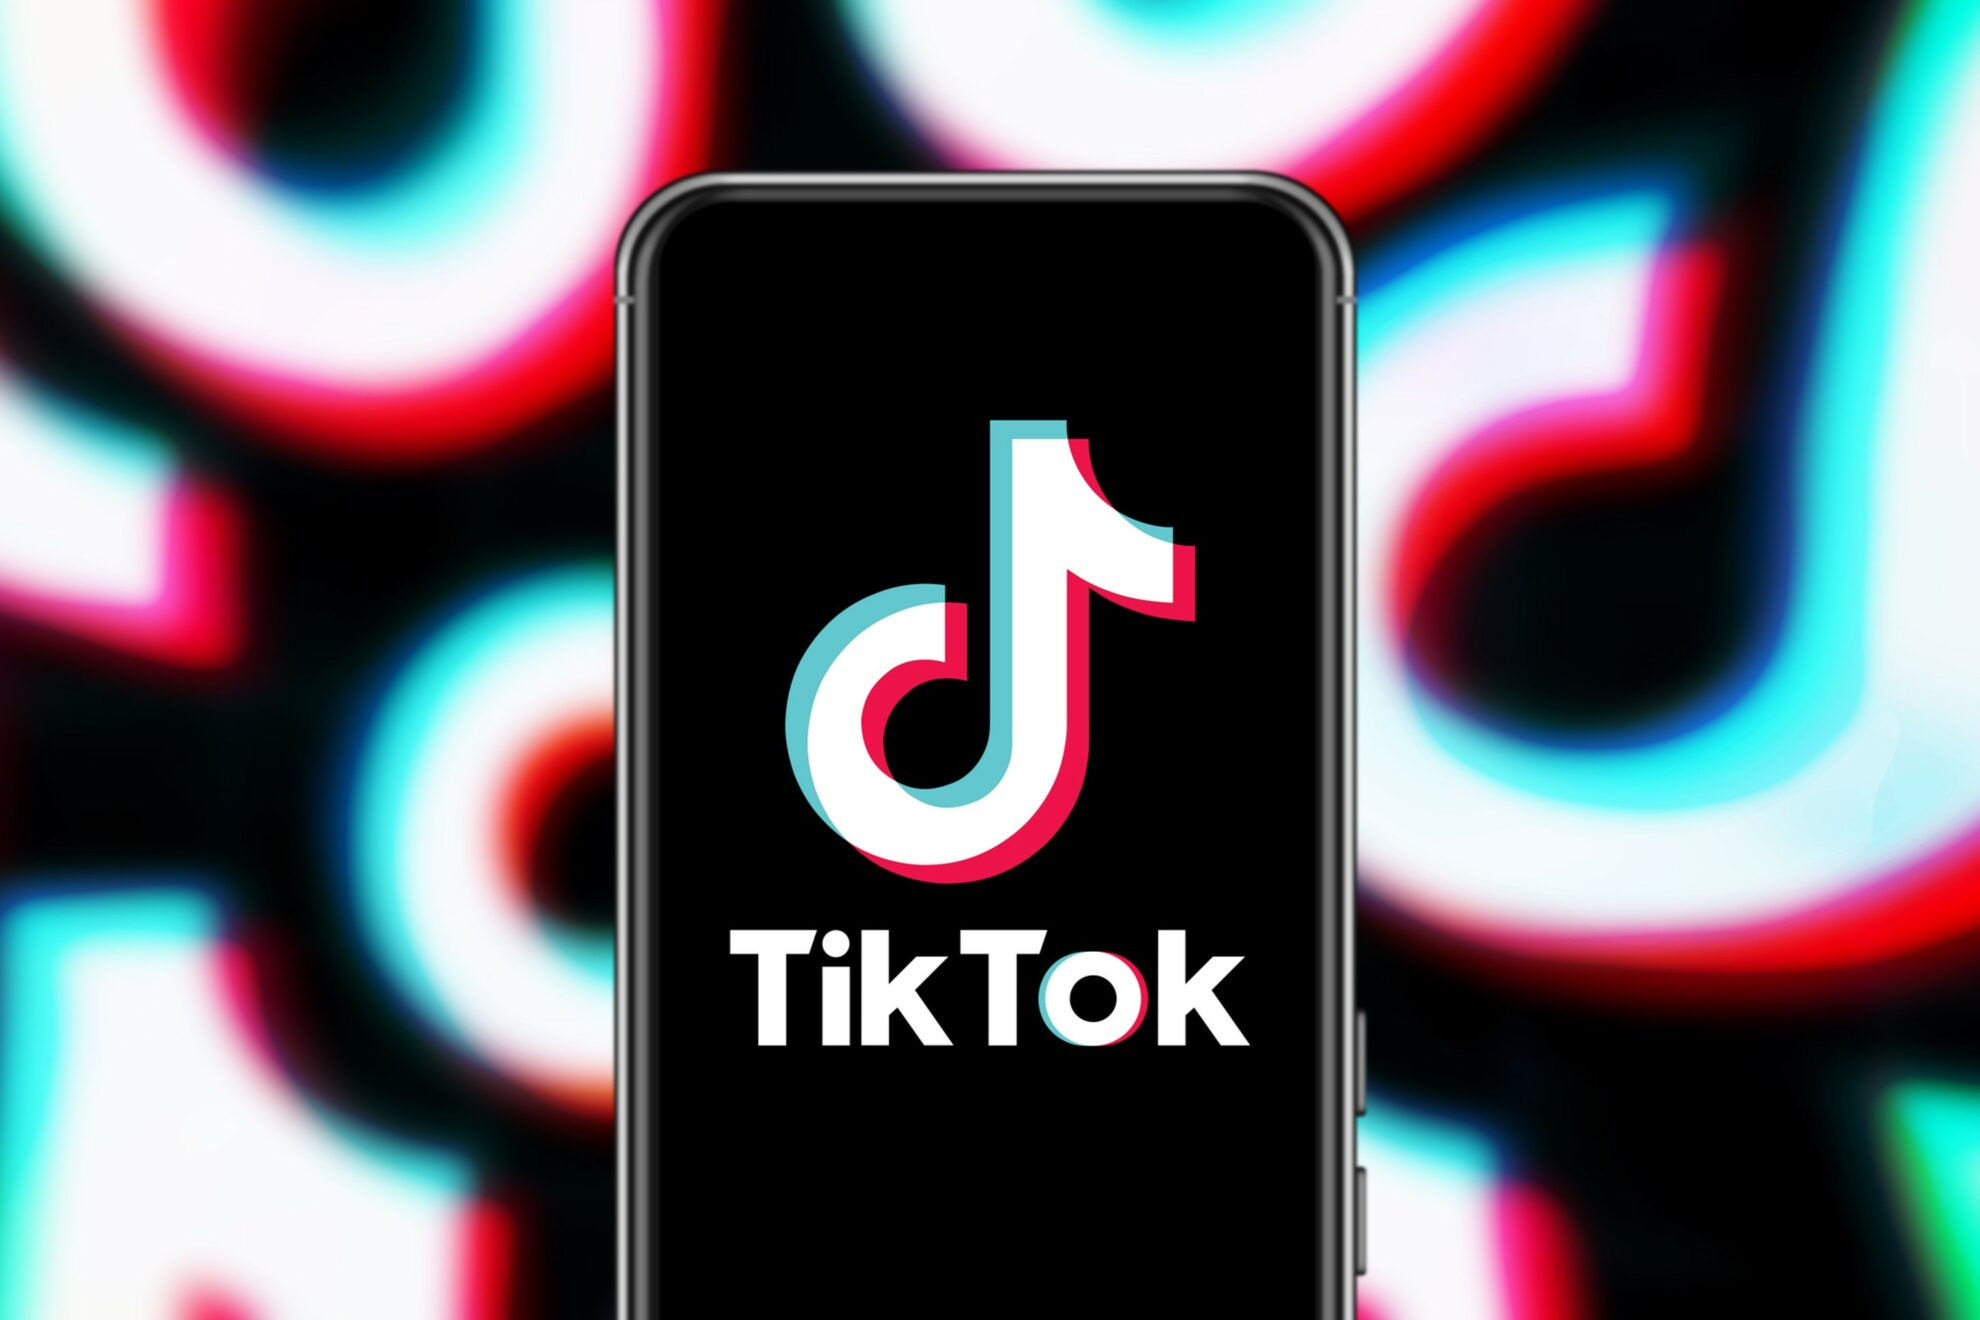 Mobile phone displaying the TikTok logo against a background made up of a mashup of TikTok logos for the article: Creating TikTok Ads For Bands And MusiciansCreating TikTok Ads For Bands And Musicians